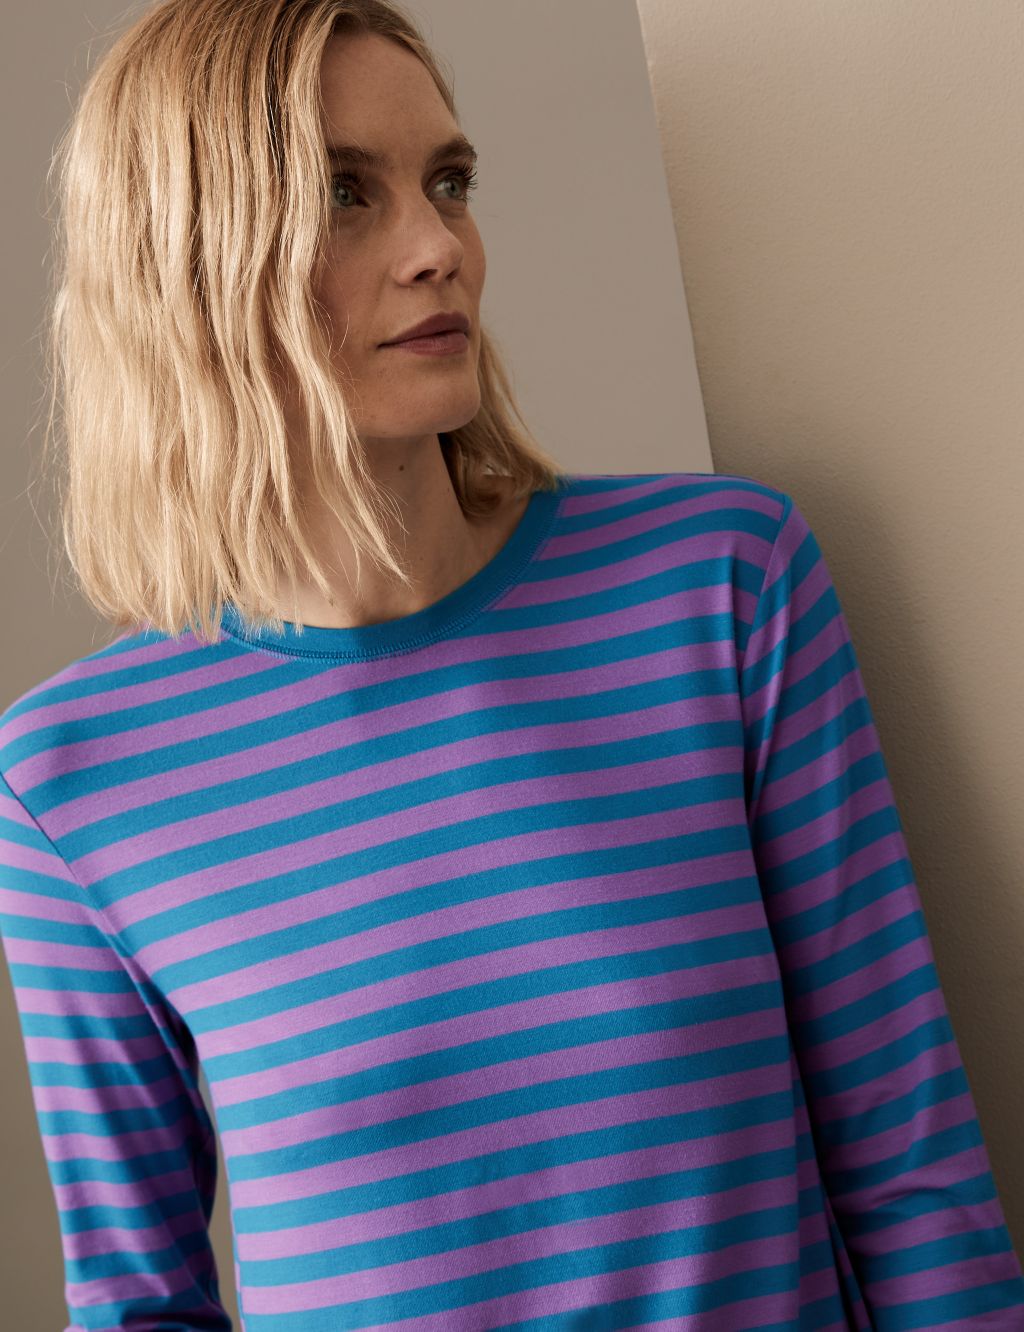 Jersey Striped Round Neck Top image 3